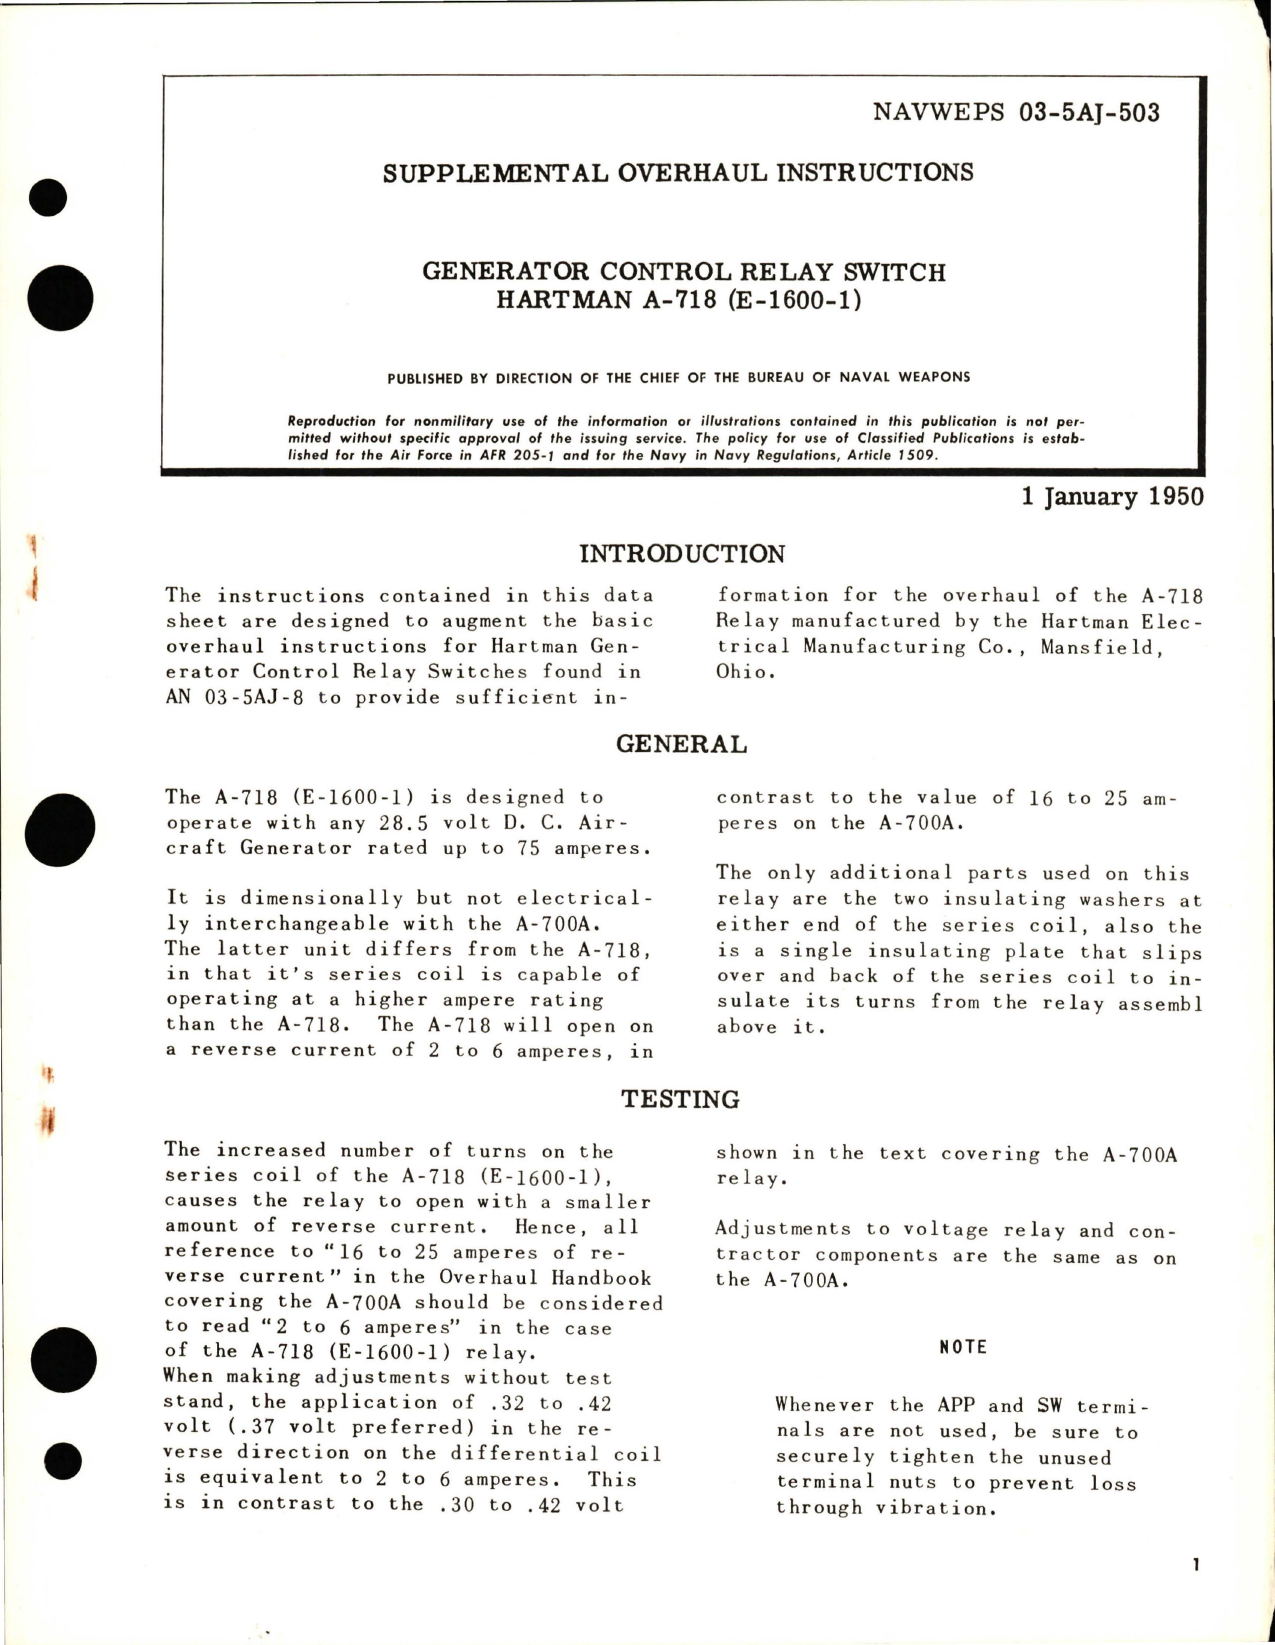 Sample page 1 from AirCorps Library document: Supplemental Overhaul Instructions for Generator Control Relay Switch - Hartman A-718